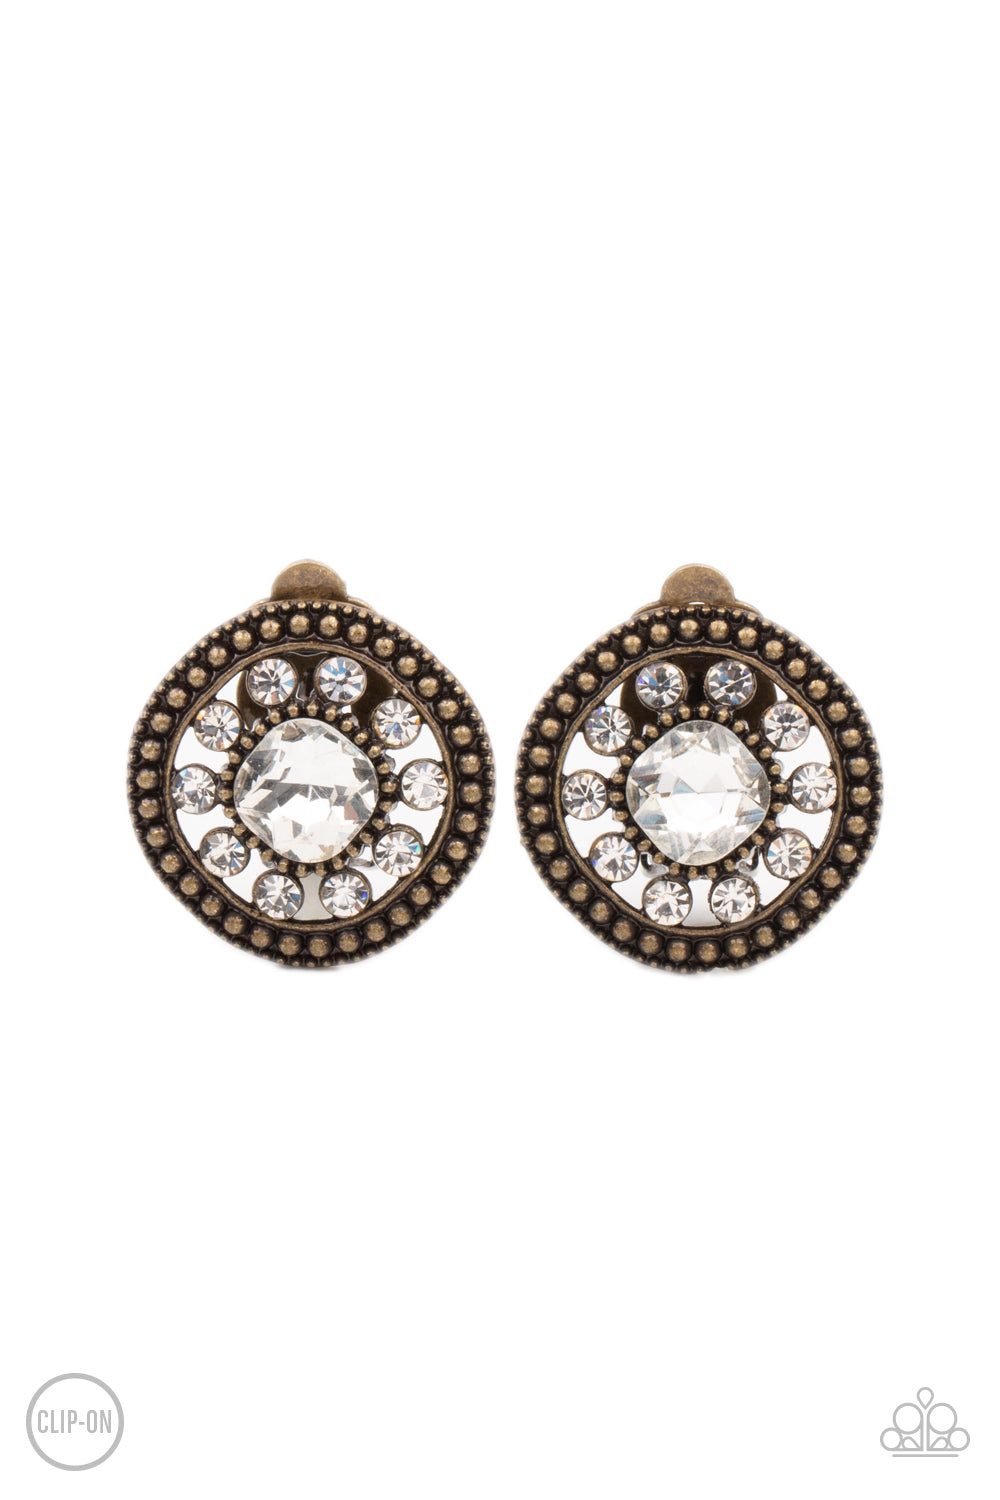 Dazzling Definition - Brass Clip-On Earrings - Princess Glam Shop